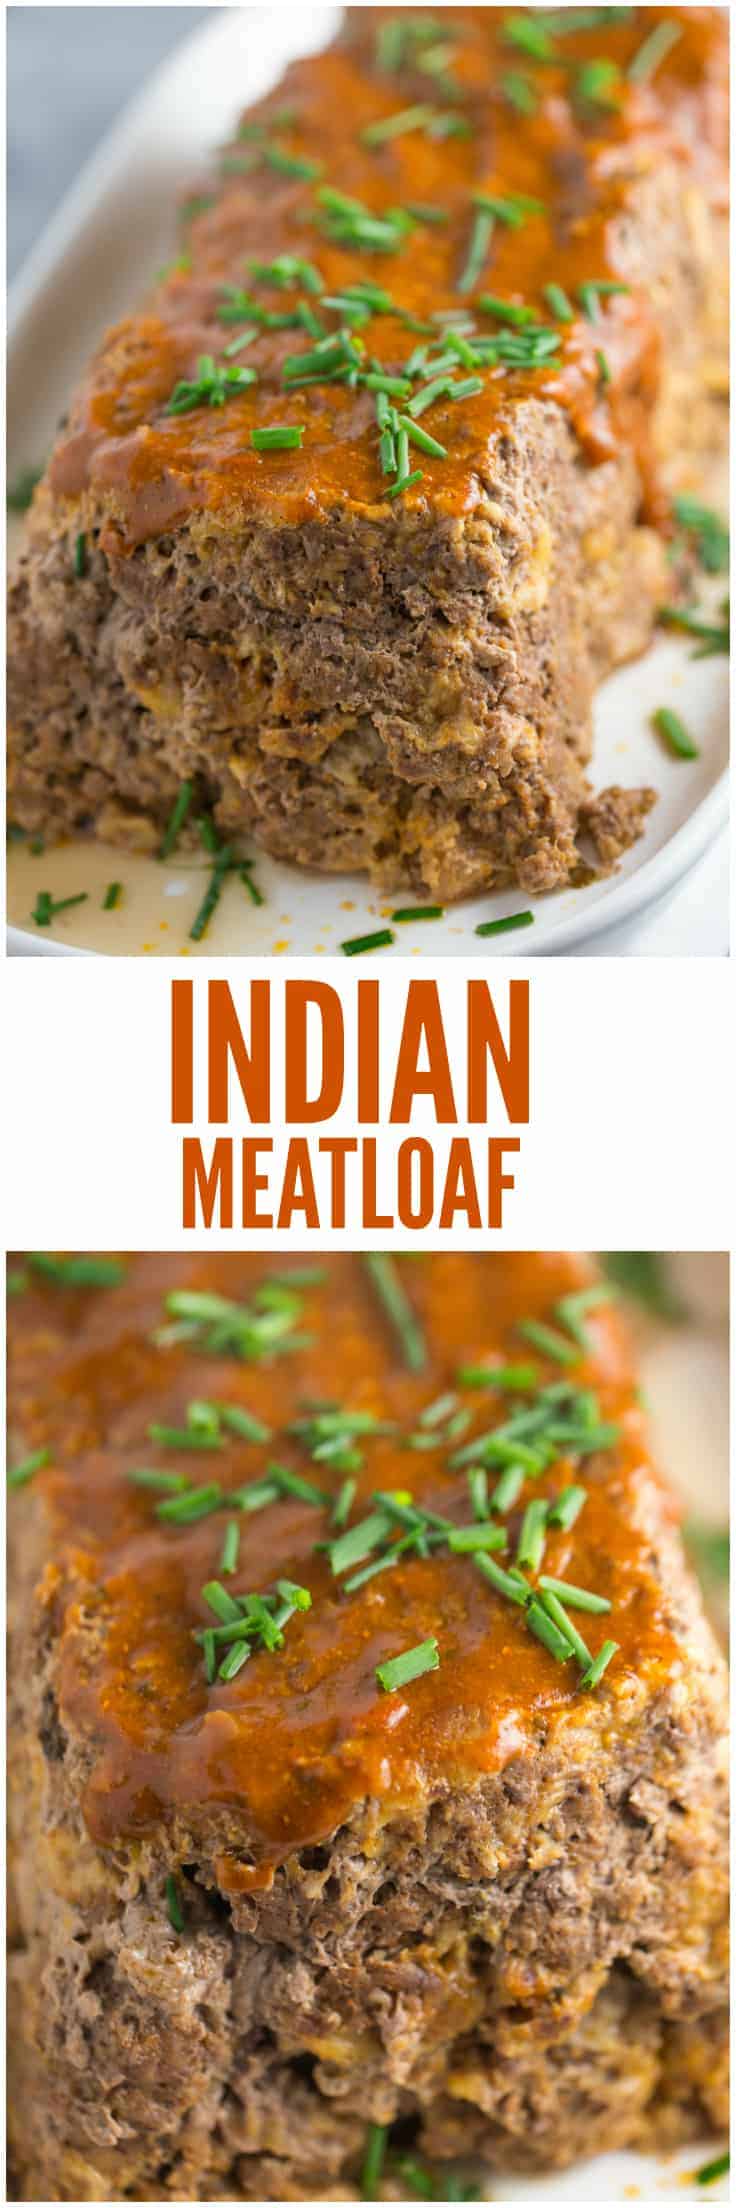 Indian Meatloaf - Not your momma's meatloaf! This is Indian Meatloaf recipe is packed with spicy exotic flavours of the far east.